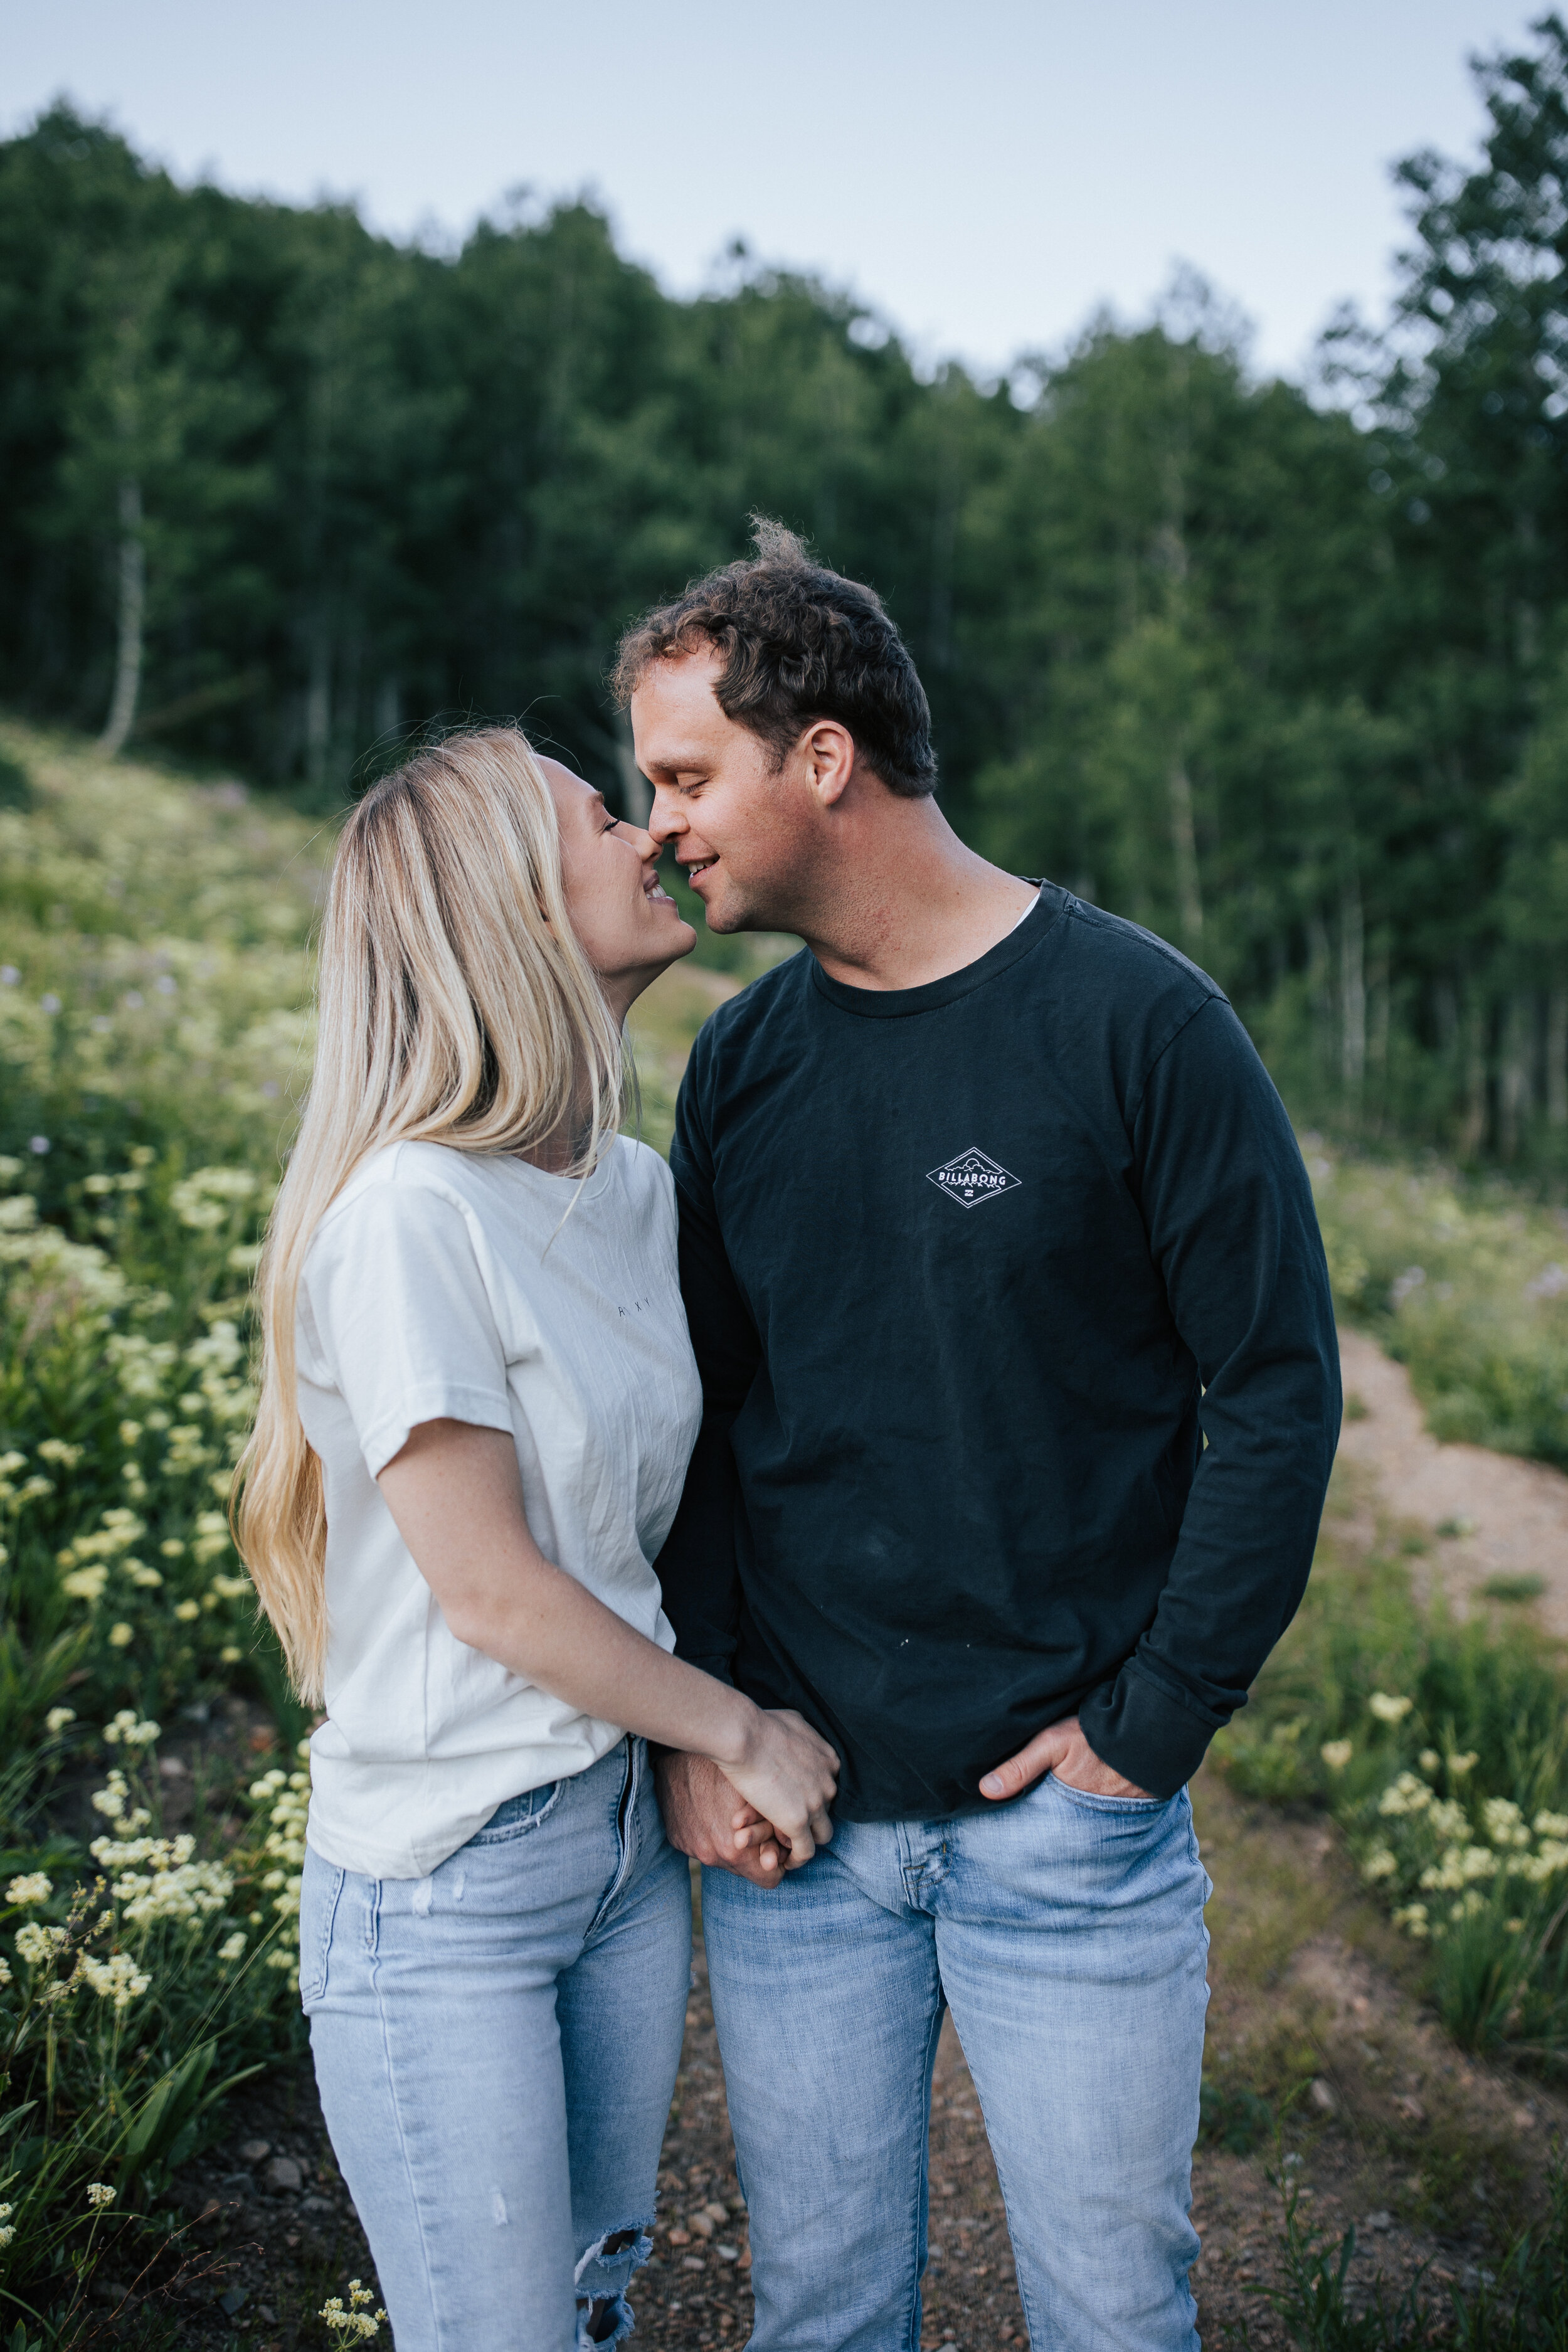  Engagement session in wildflowers in the mountains near Park City, Utah. Summertime engagement photos with mountain views. Engaged couple kiss in the mountains. Outfit inspo. Engagement outfits. #engagementphotos #engagements #weddingphotographer #p